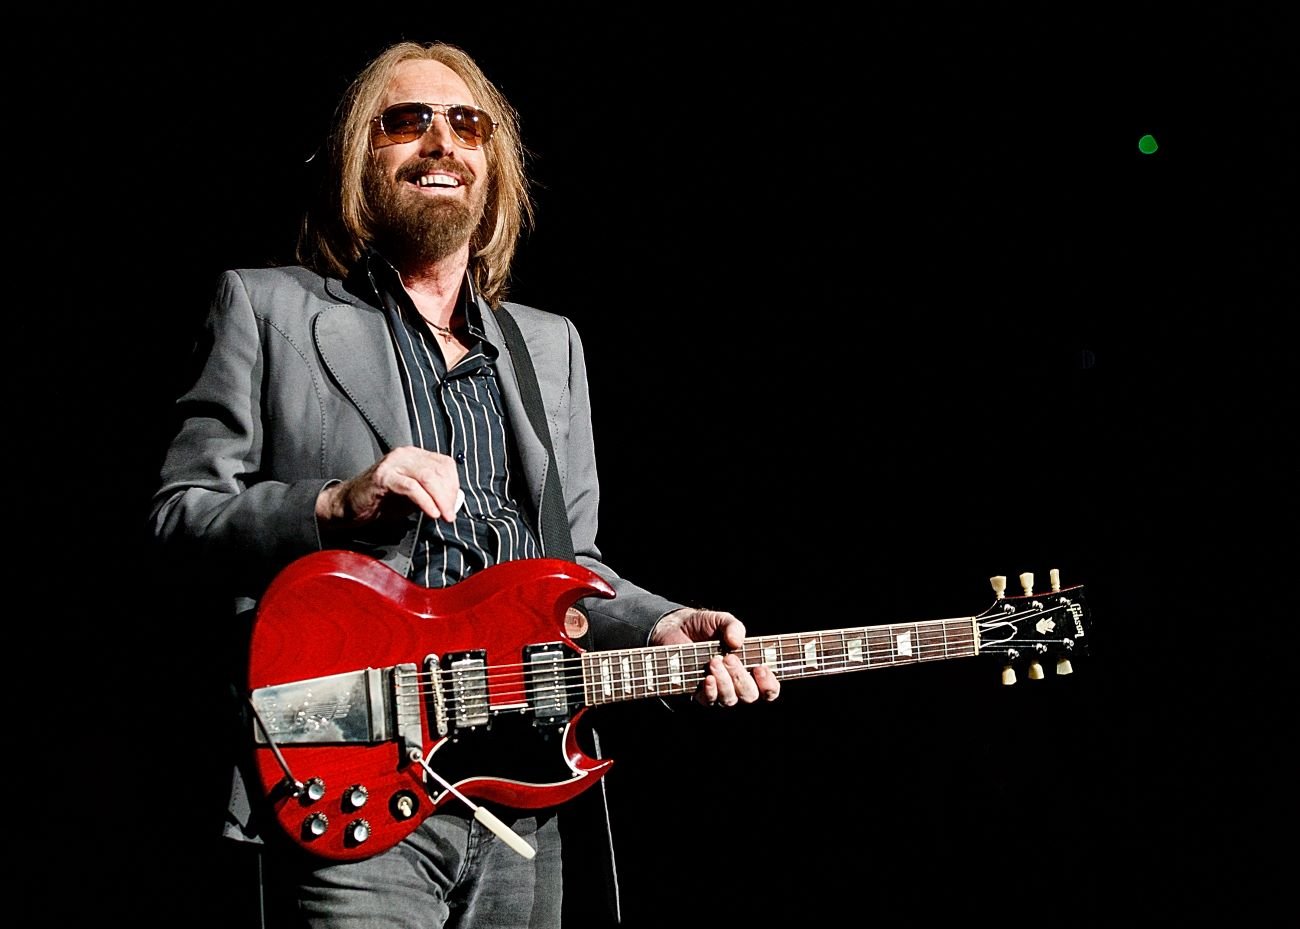 Tom Petty wears sunglasses and holds a red guitar.